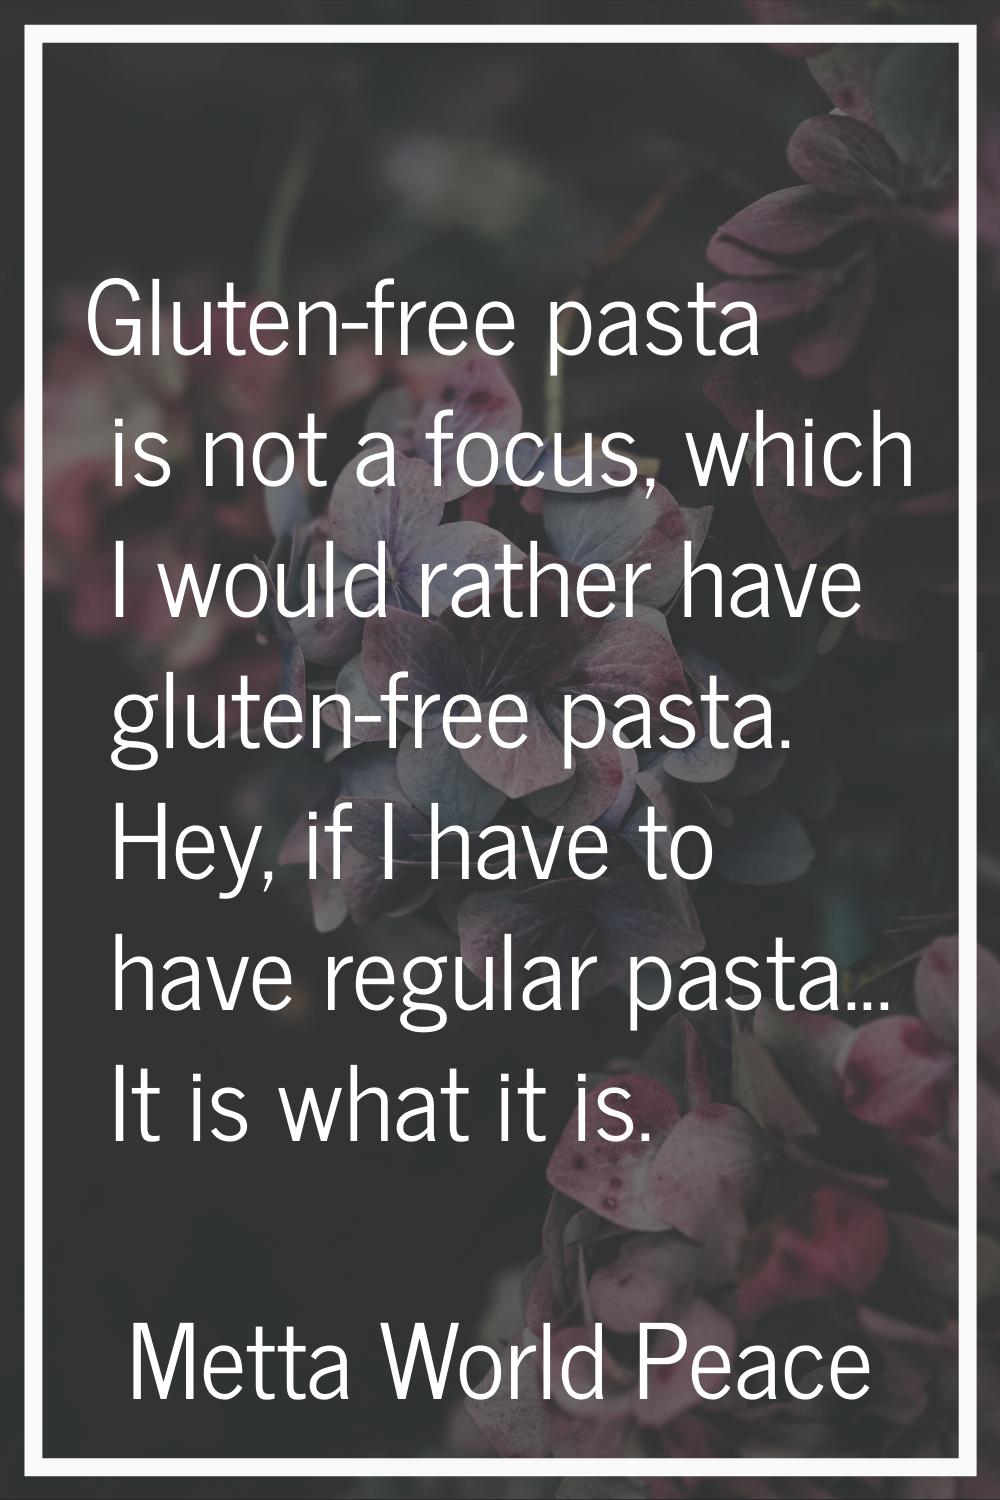 Gluten-free pasta is not a focus, which I would rather have gluten-free pasta. Hey, if I have to ha